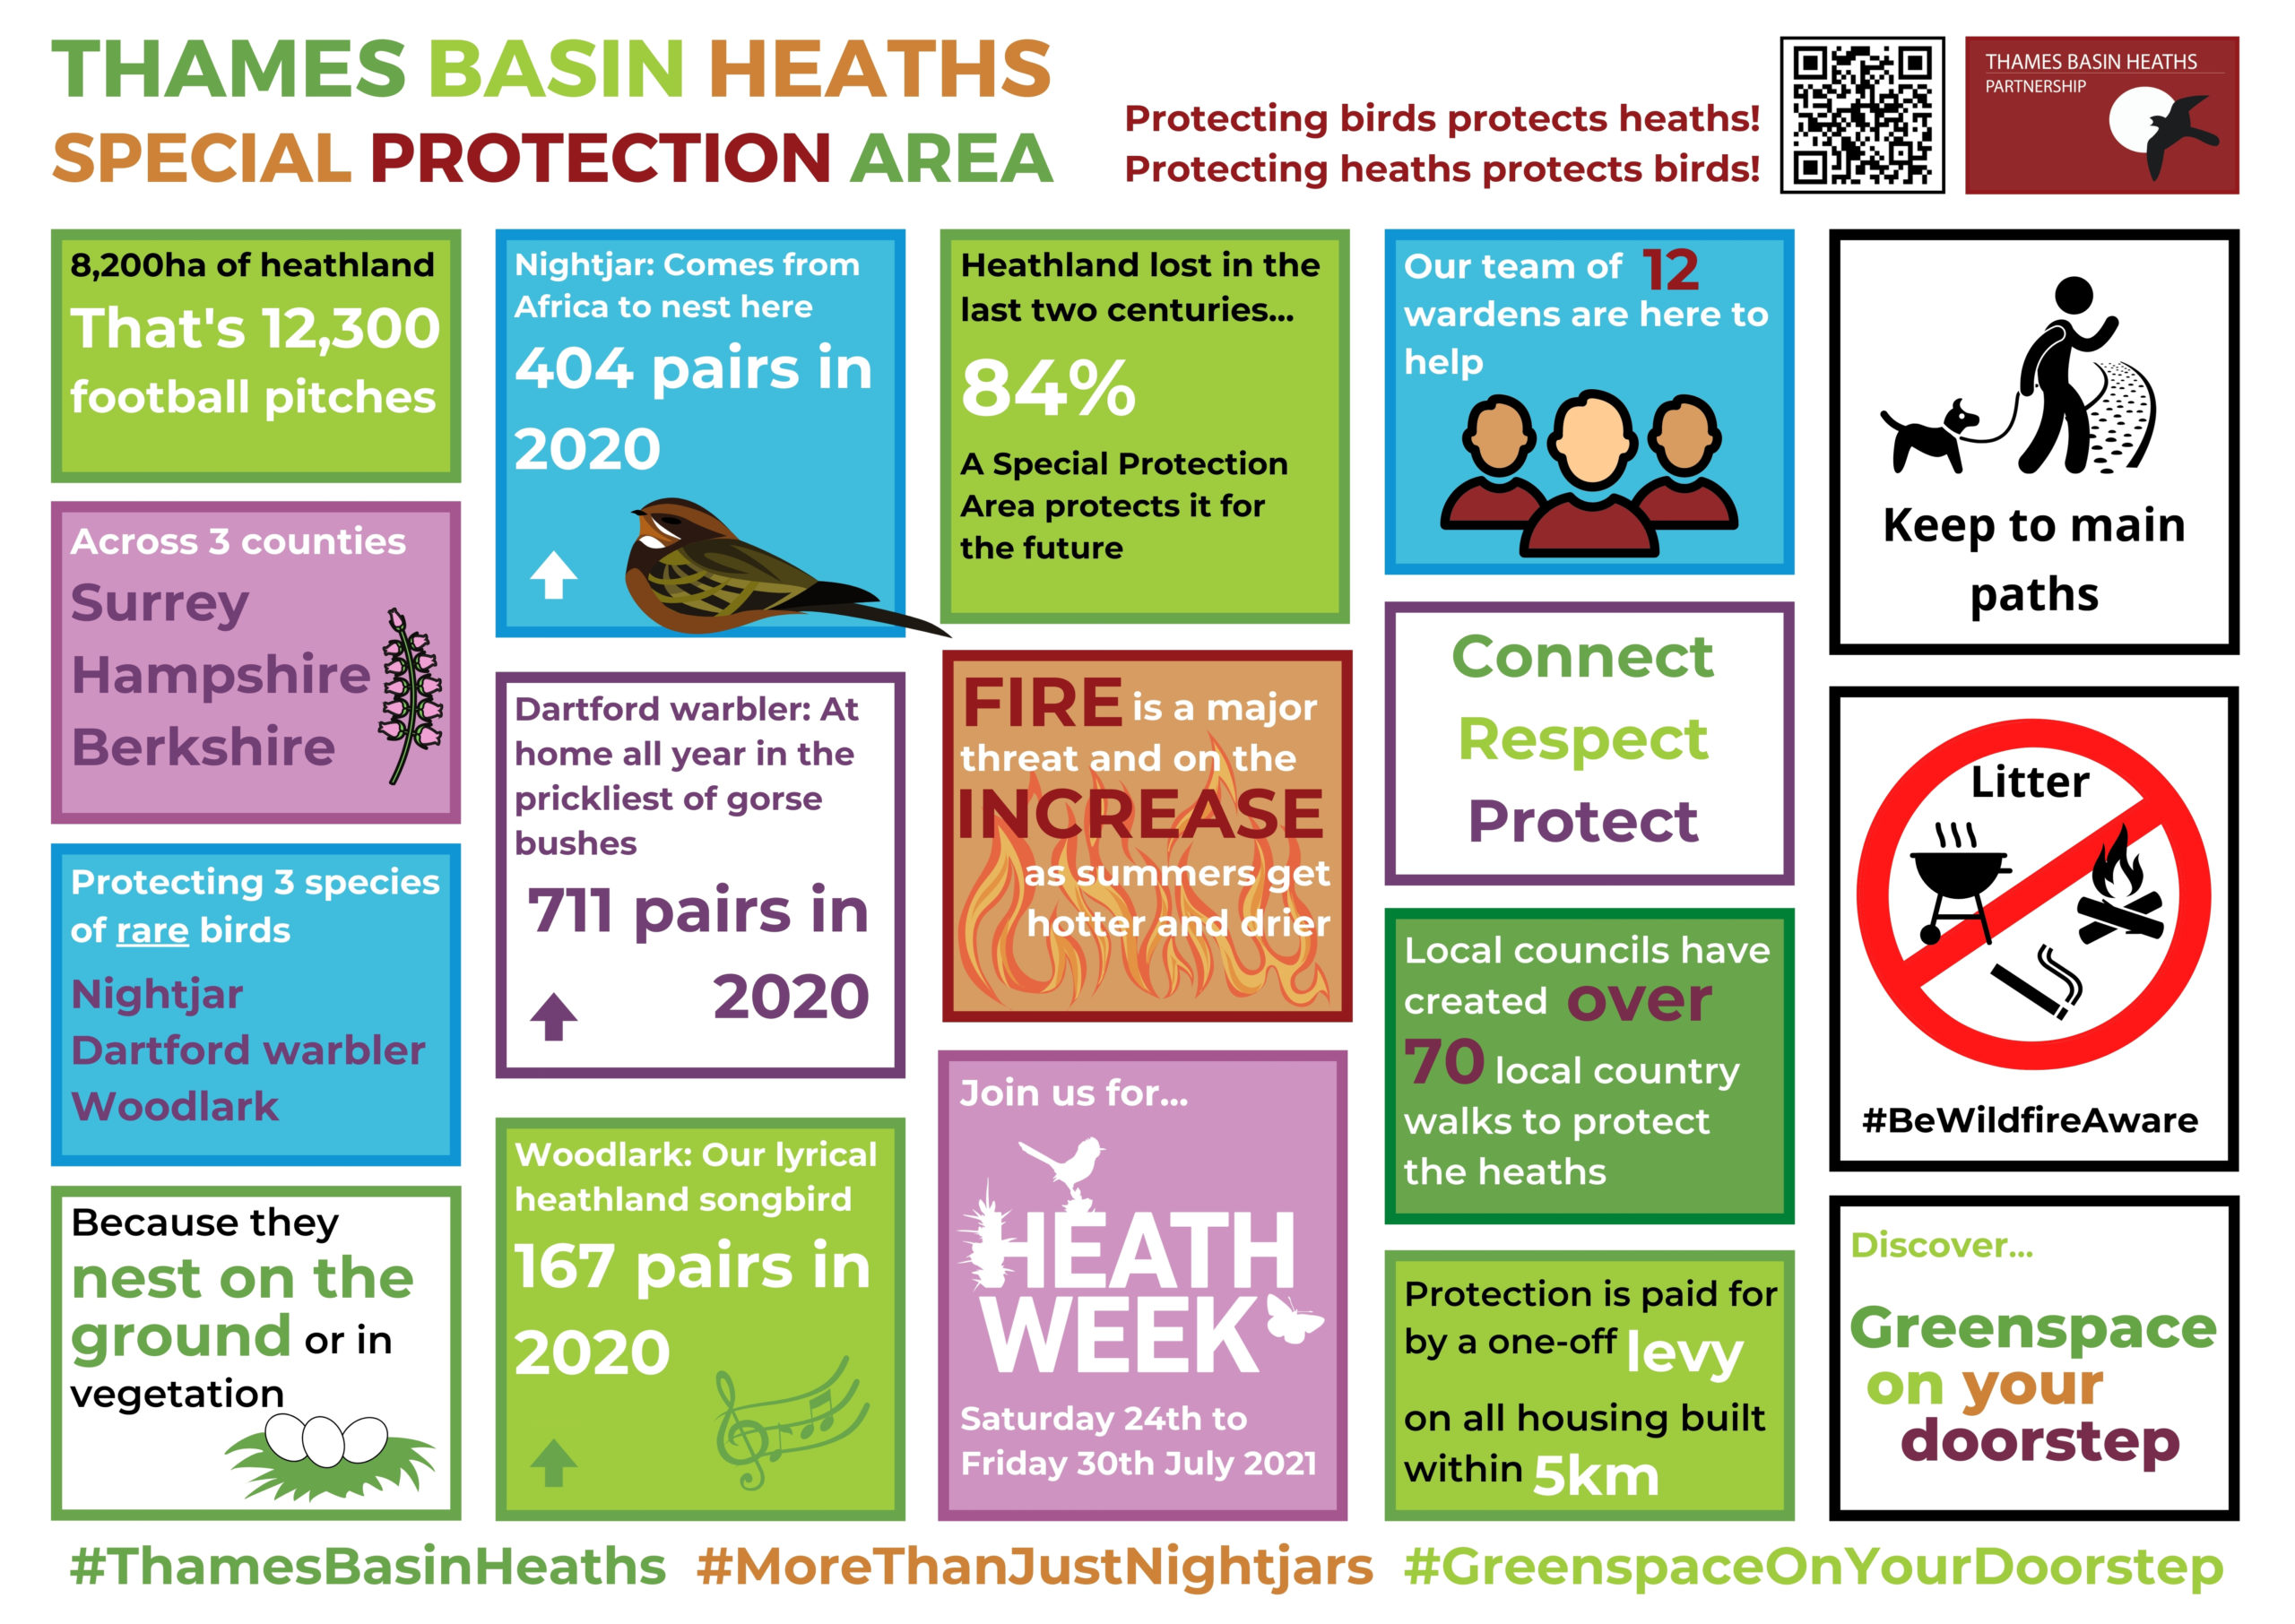 Thames Basin Heaths Special Protection Area facts and figures. 8,200ha of heathland, that's 12,300 football pitches!